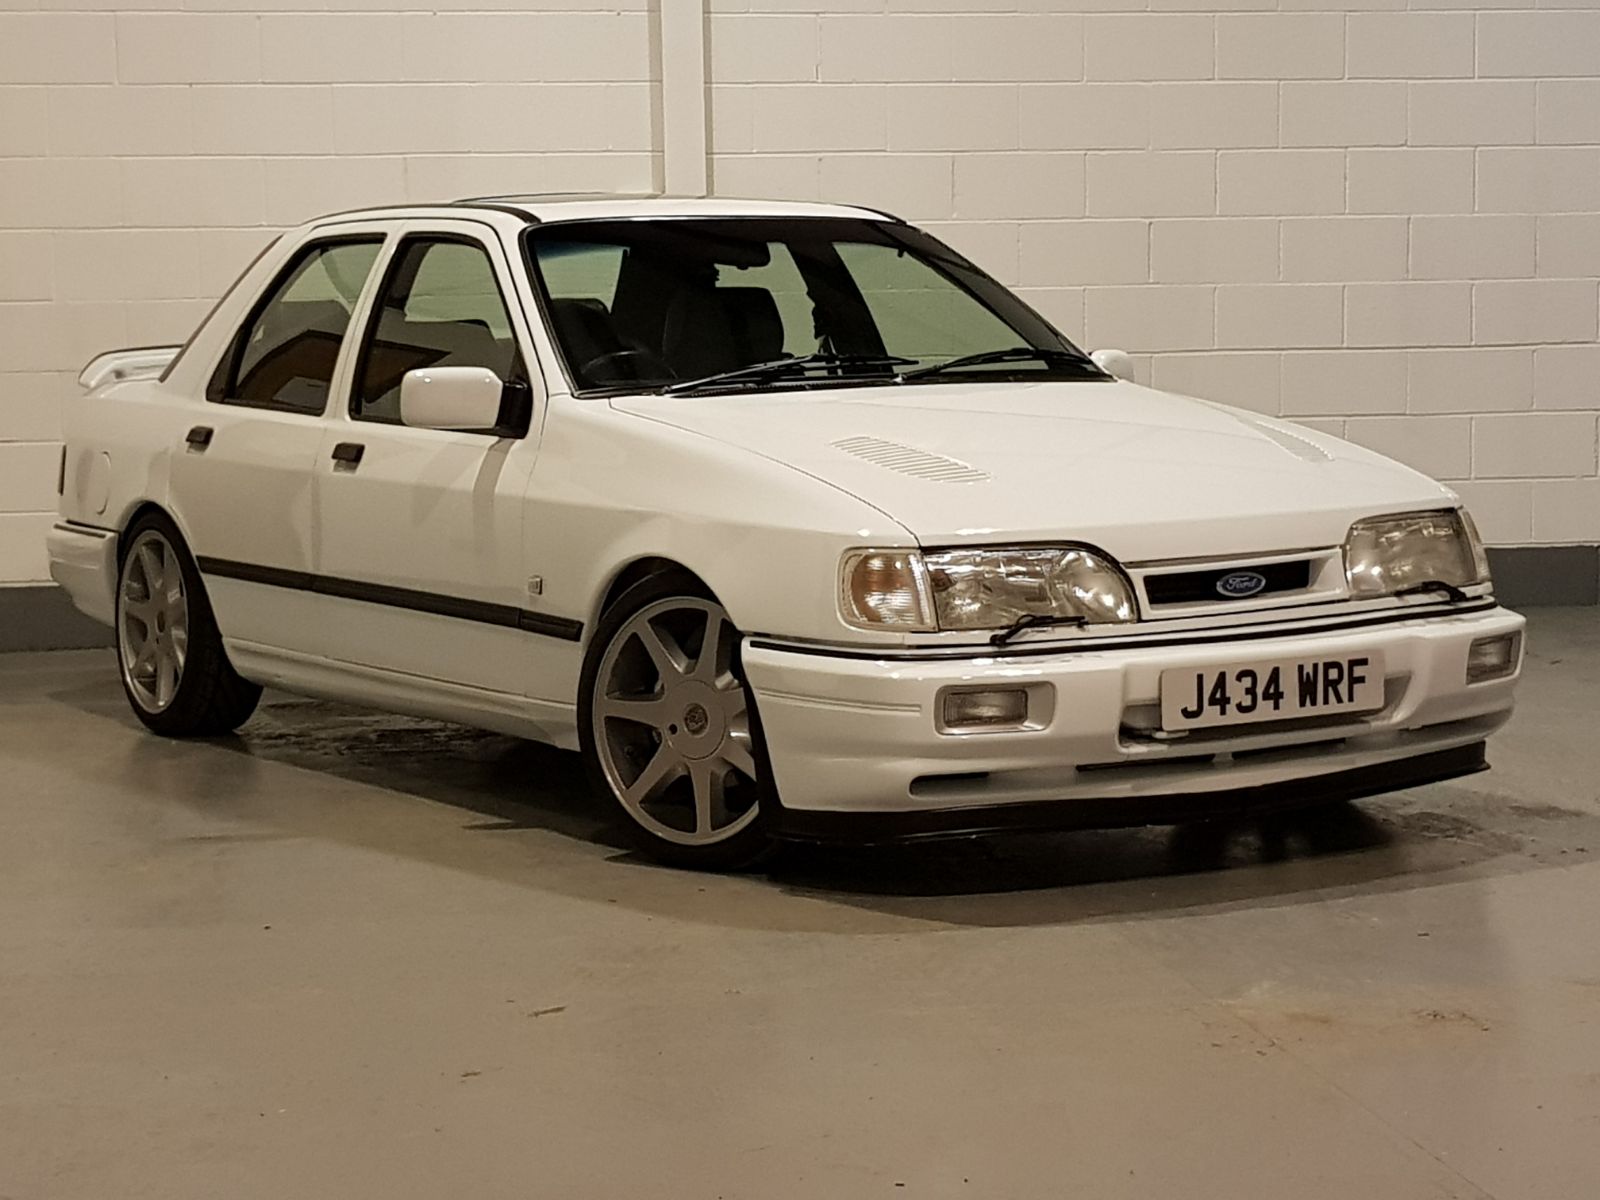 1991 Ford Sierra Sapphire Cosworth (2WD)